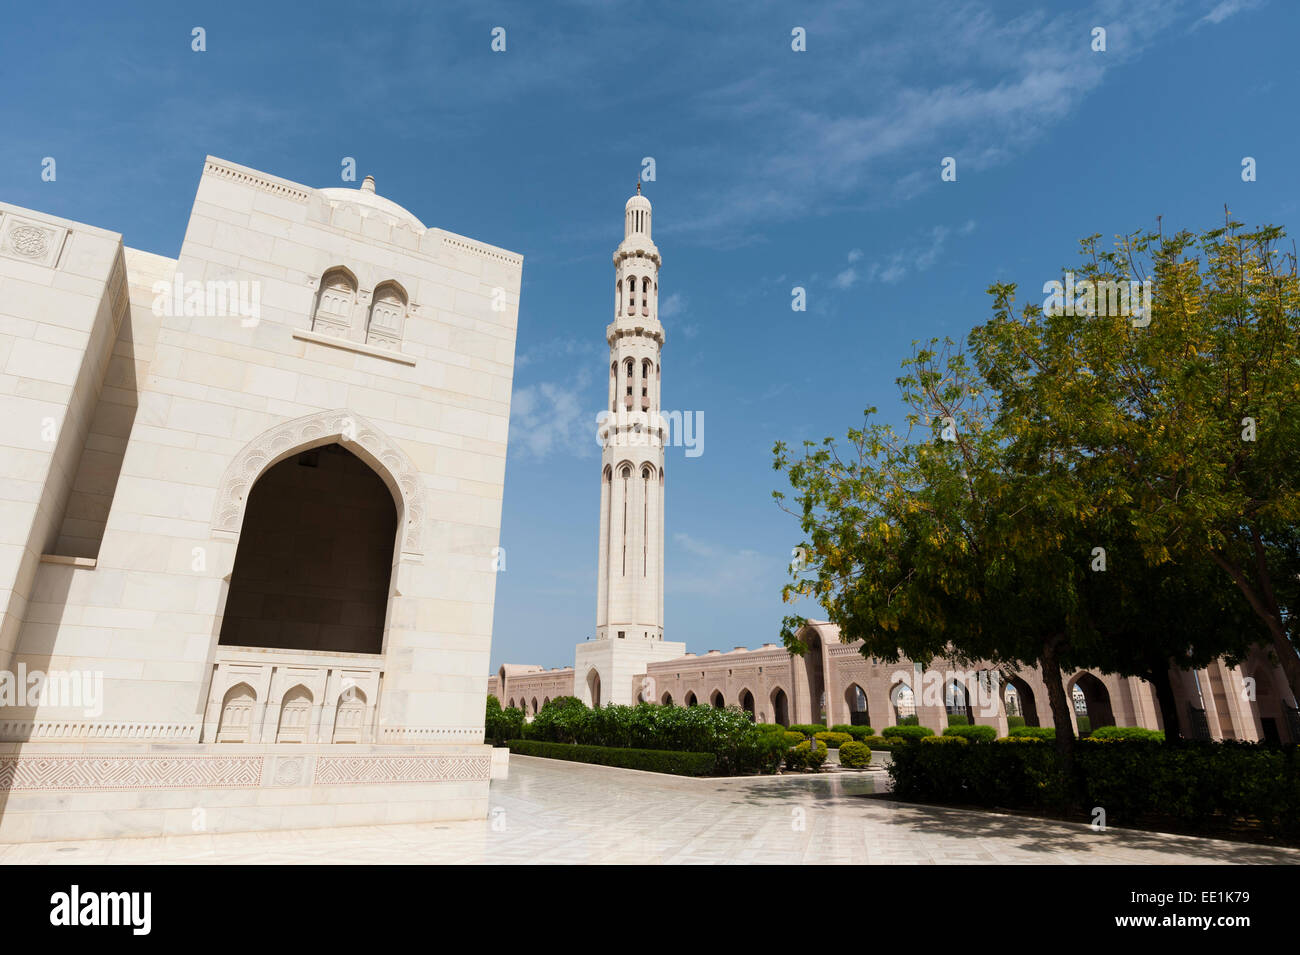 Sultan Qaboos Mosque, Muscat, Oman, Middle East Stock Photo